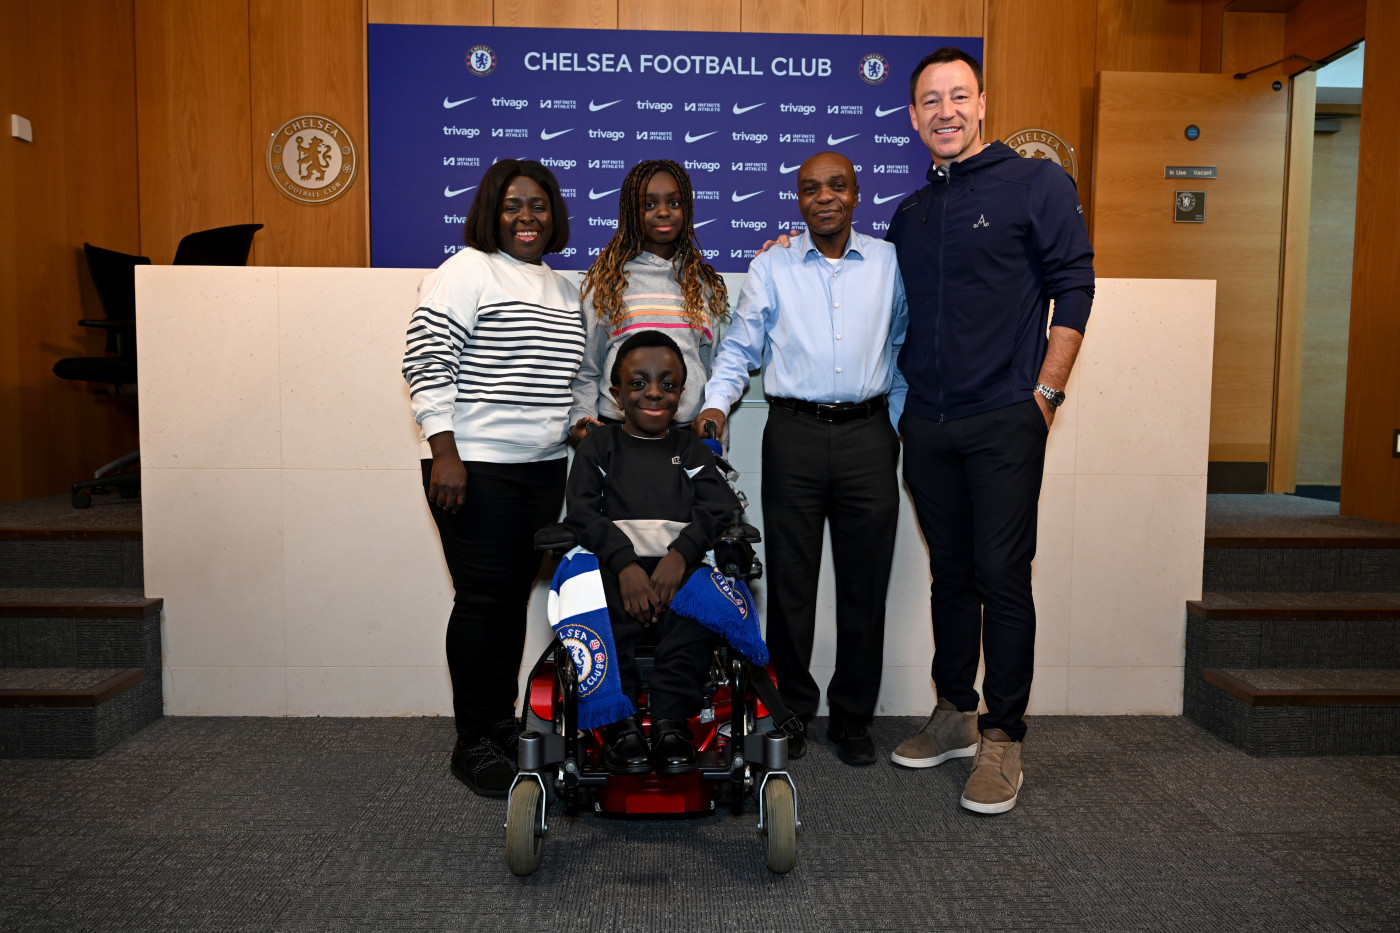 Chelsea legend John Terry meets Ruky and his family